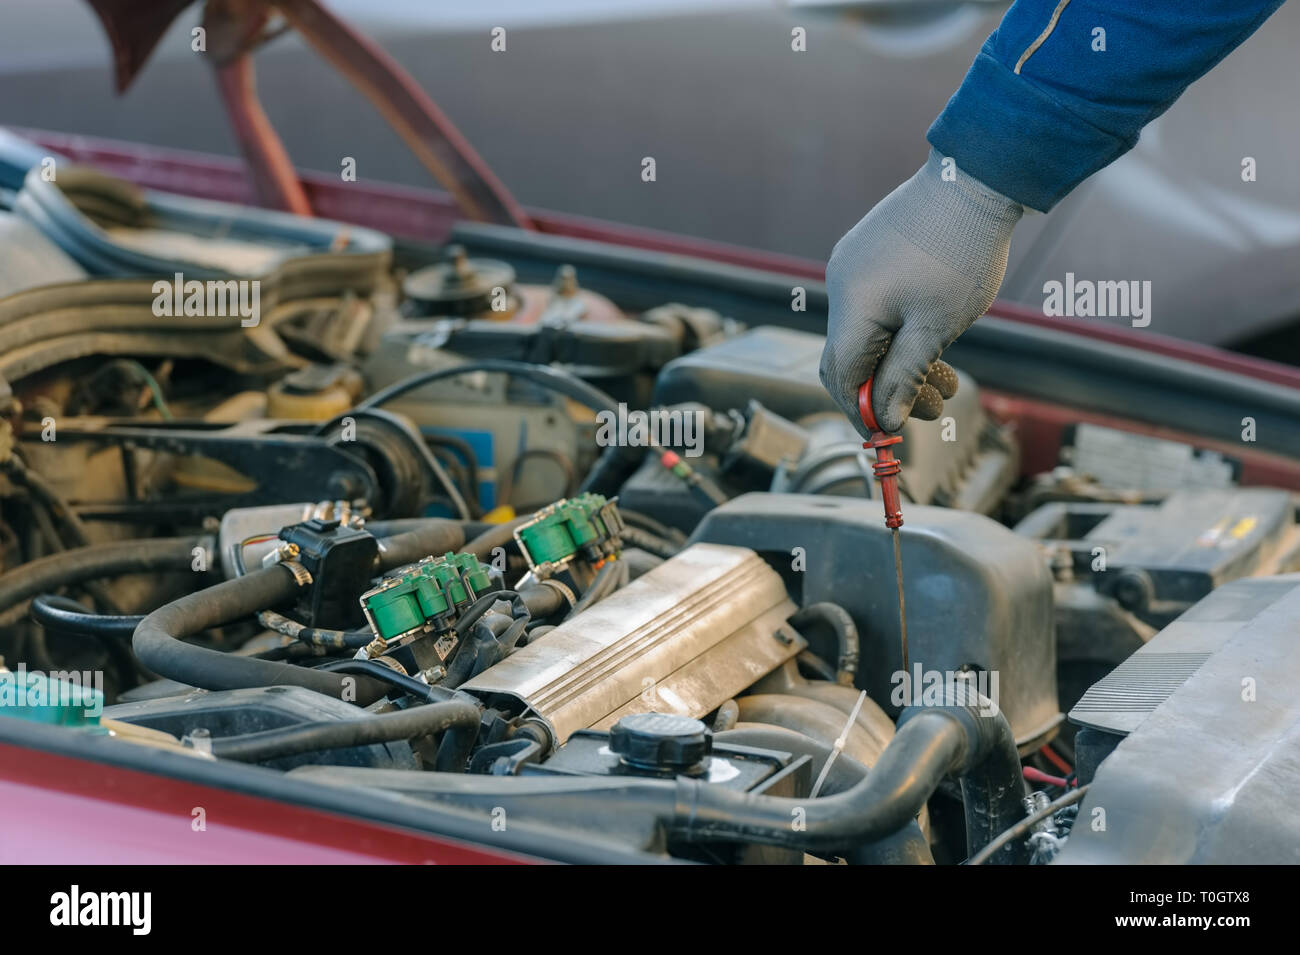 engine oil changing at car with liquefied petroleum gas system Stock Photo